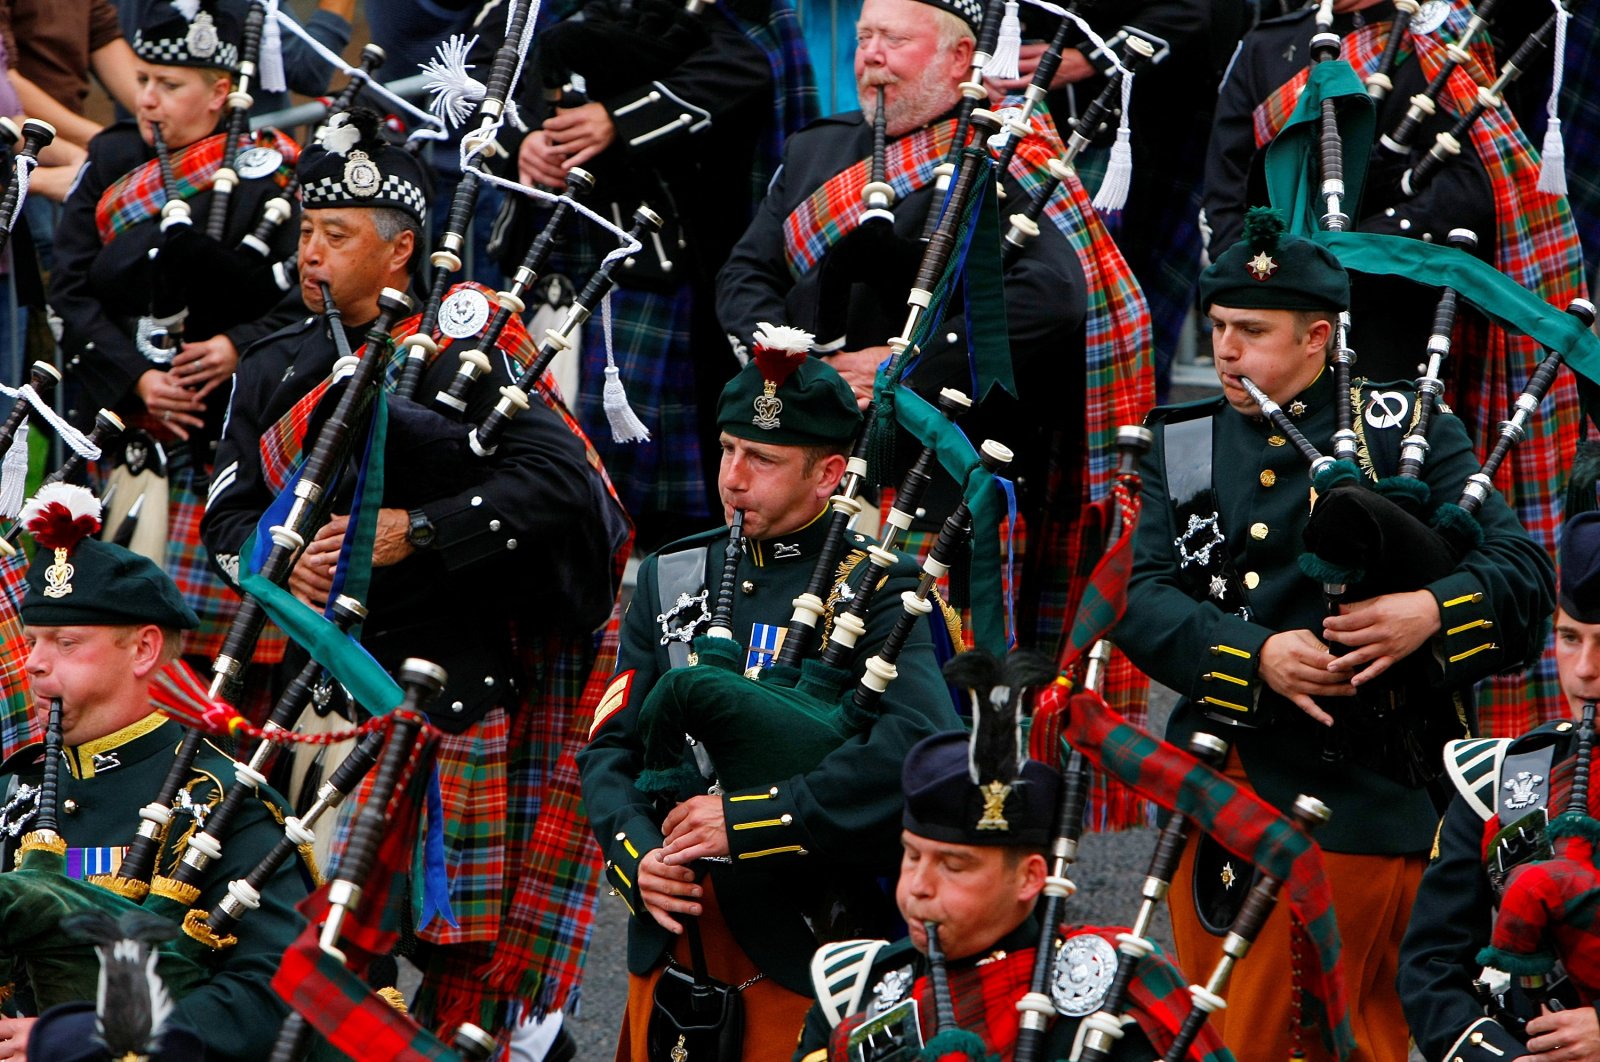 Pipers from the Edinburgh Military Tattoo Massed Pipes and Drums perform during the Edinburgh Fringe Festival parade in Holyrood Park in Edinburgh, Scotland, Aug. 9, 2009. (REUTERS)